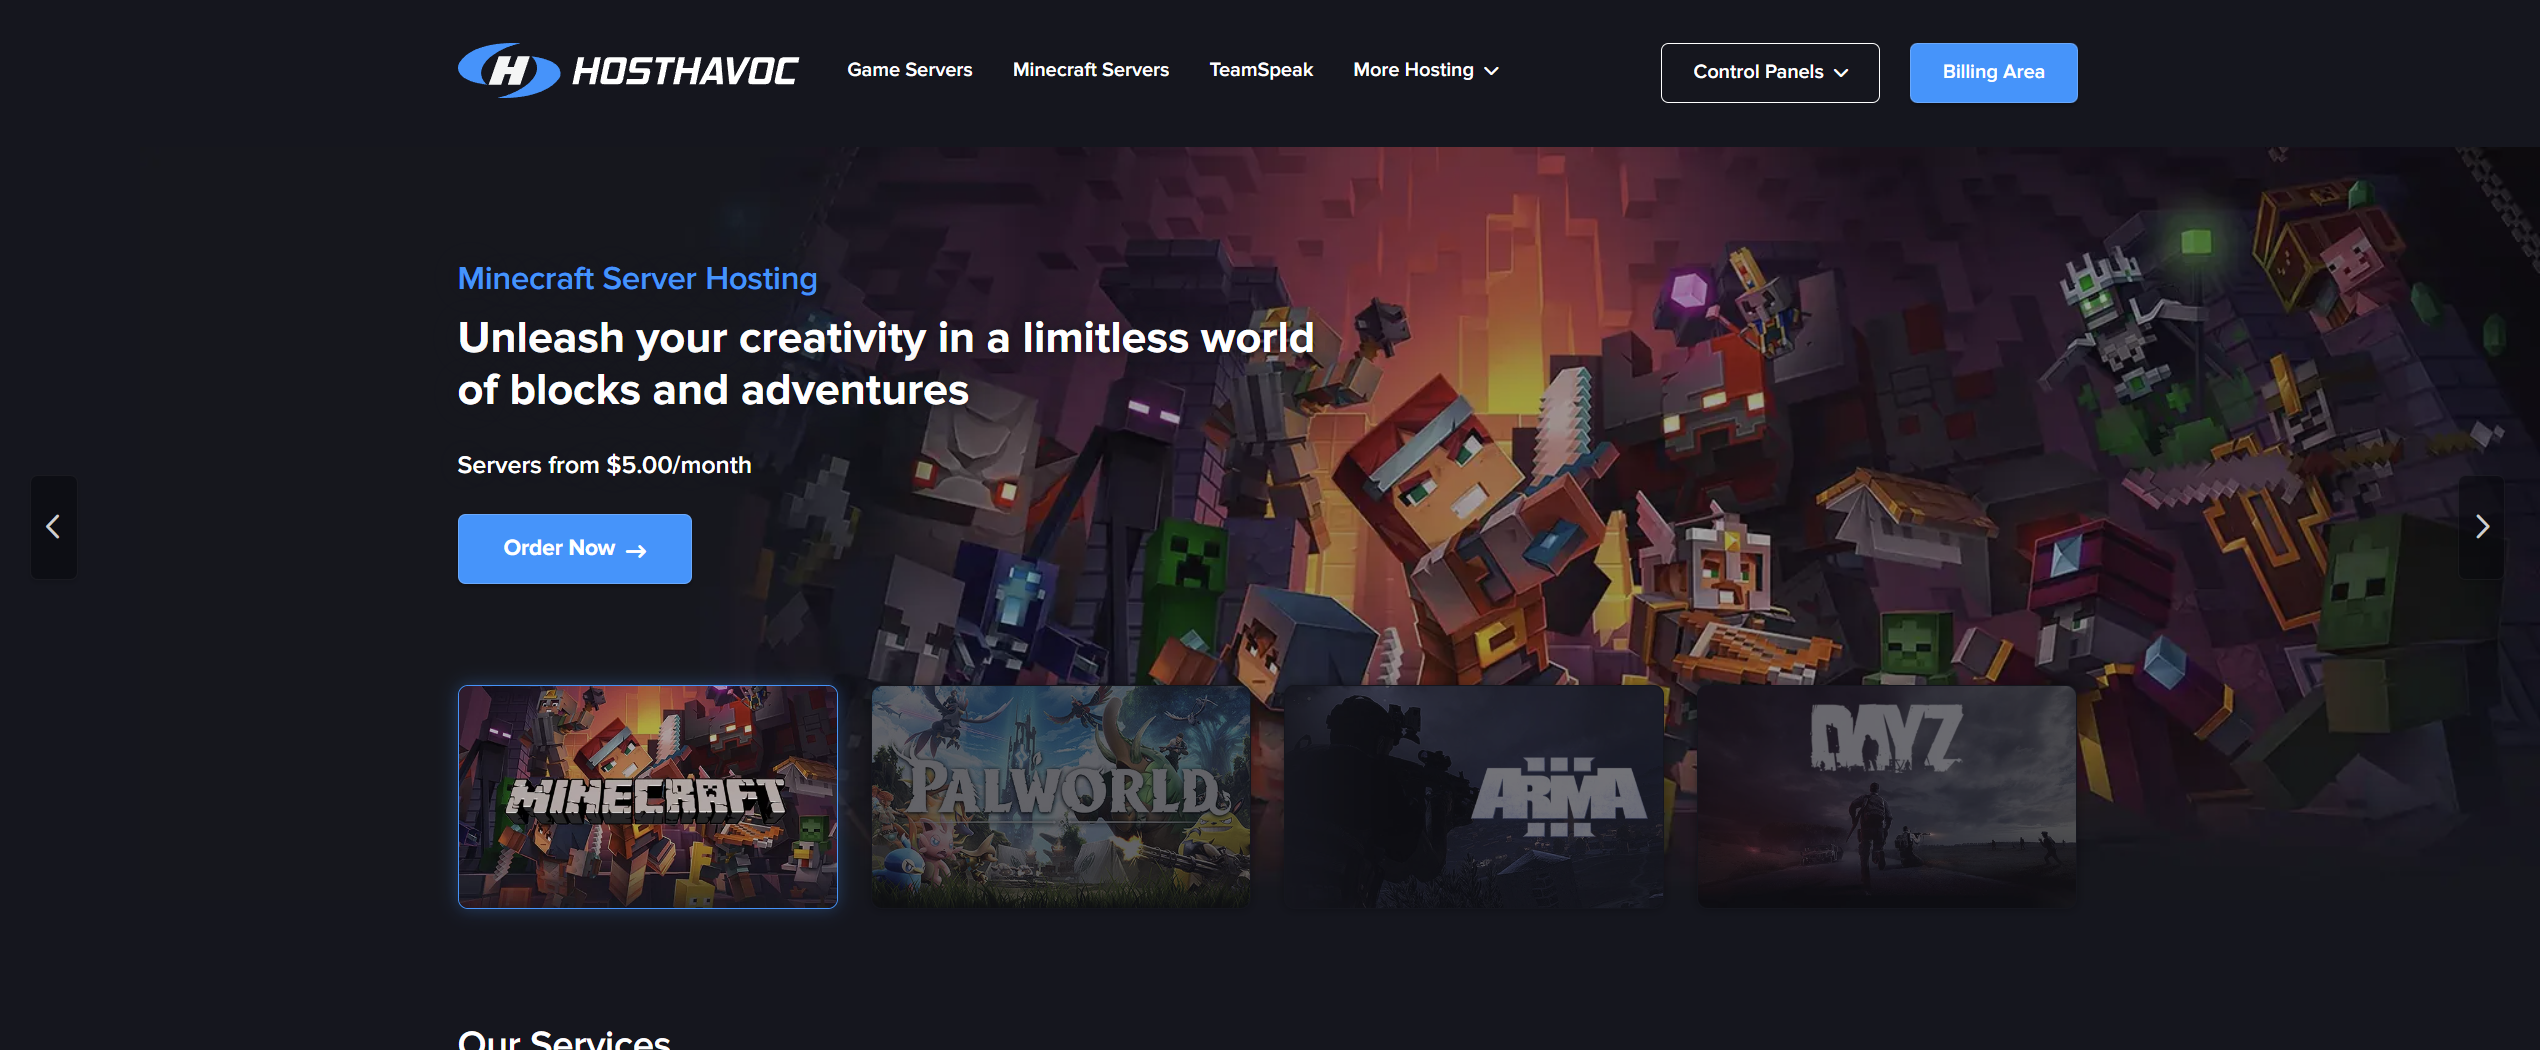 Host Havoc Home Page